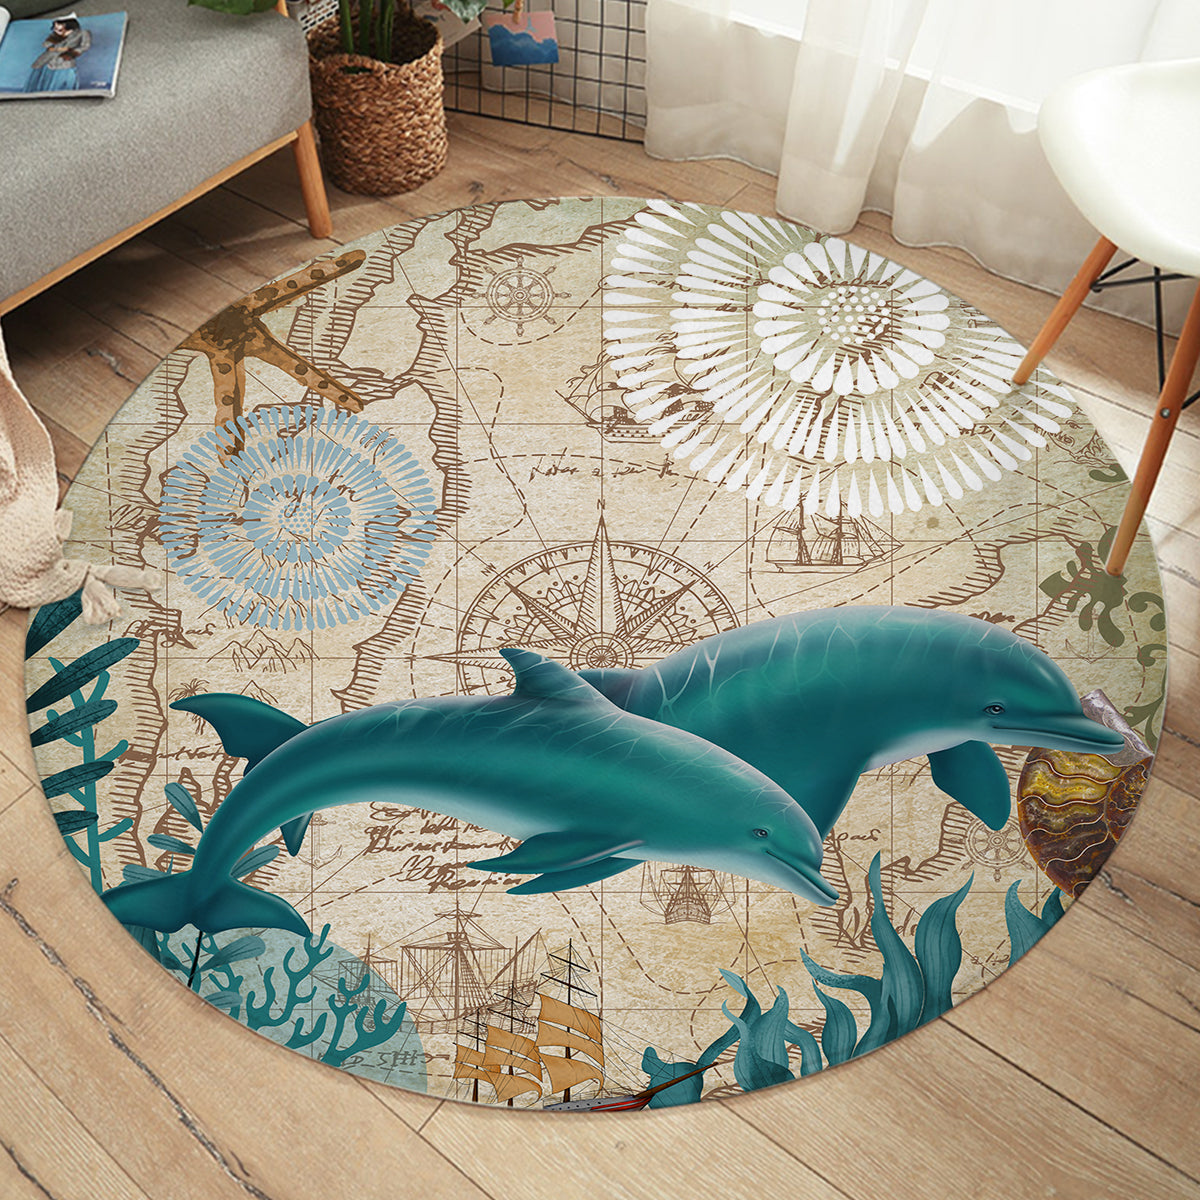  Dolphin Rug, 2x3 Rug, Underwater Rugs for Entryway Living Room  Bedroom, Sea Animal Small Area Rug & Room Decor, Washable Non Slip Soft Low  Pile Indoor Door Mat, Home Decorative Patterned